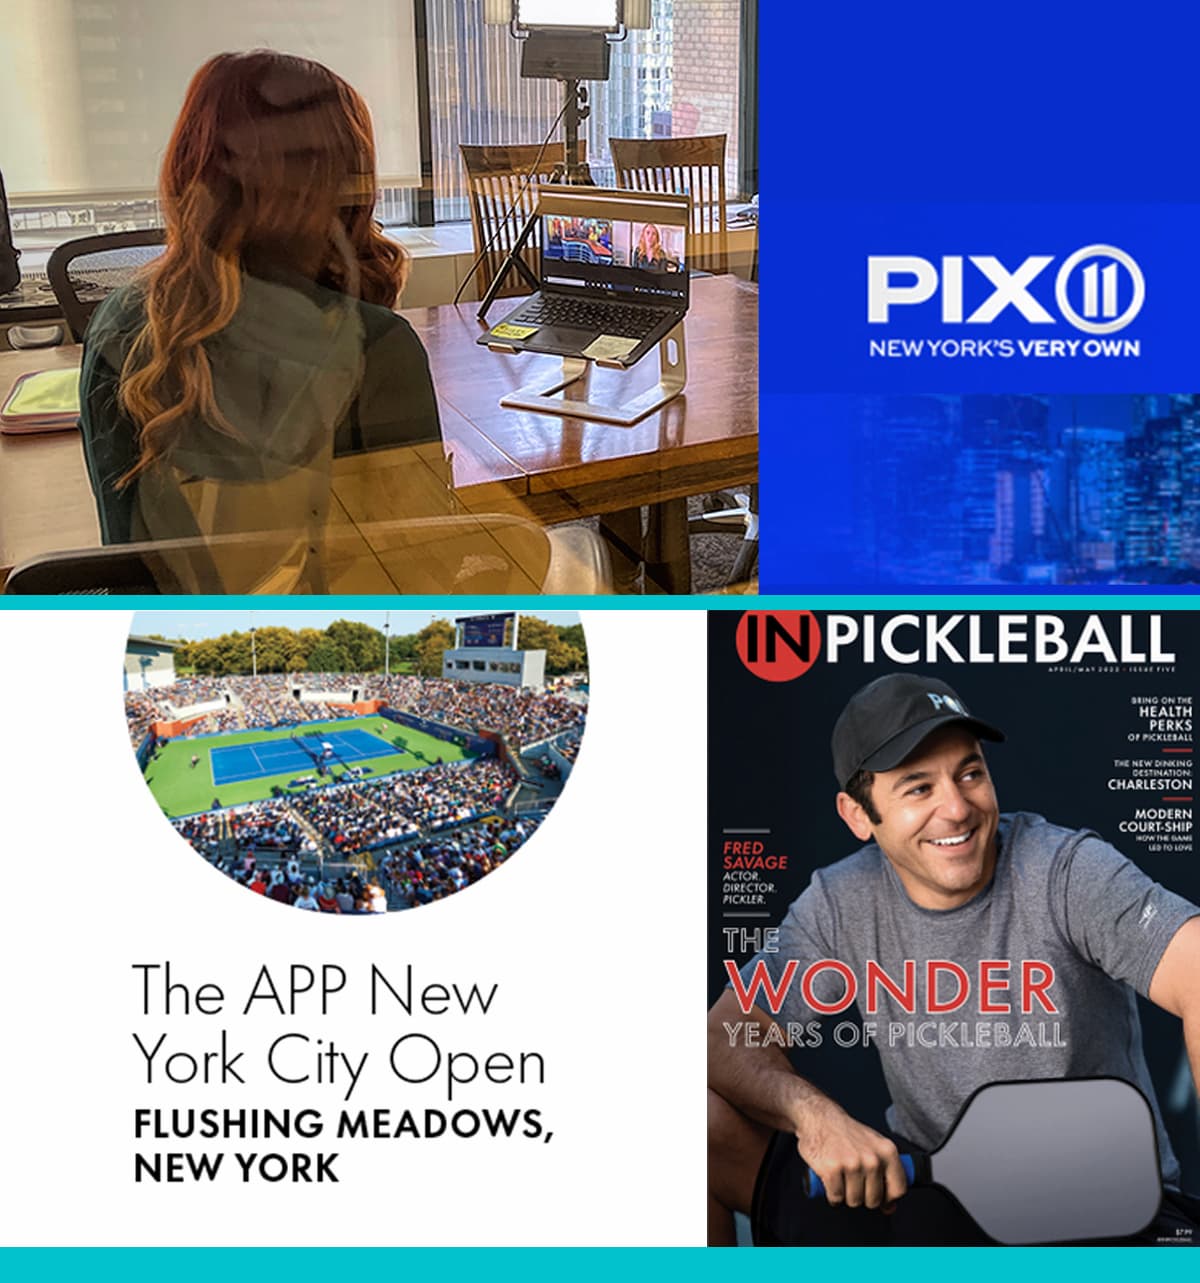 meghan on pix11 news and pickleball images